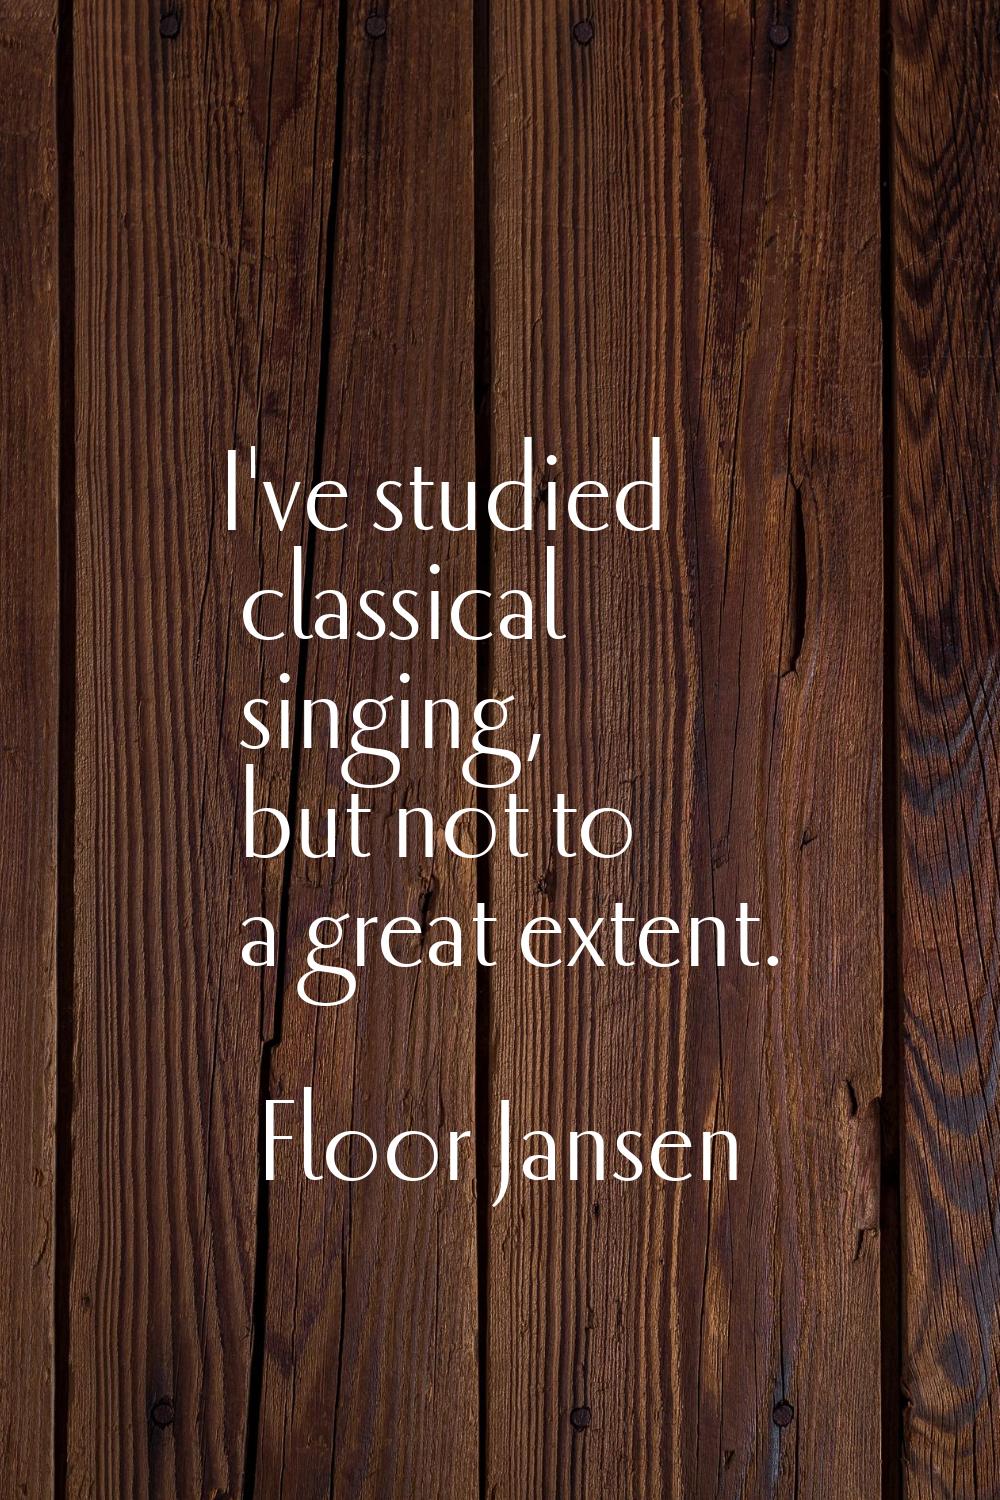 I've studied classical singing, but not to a great extent.